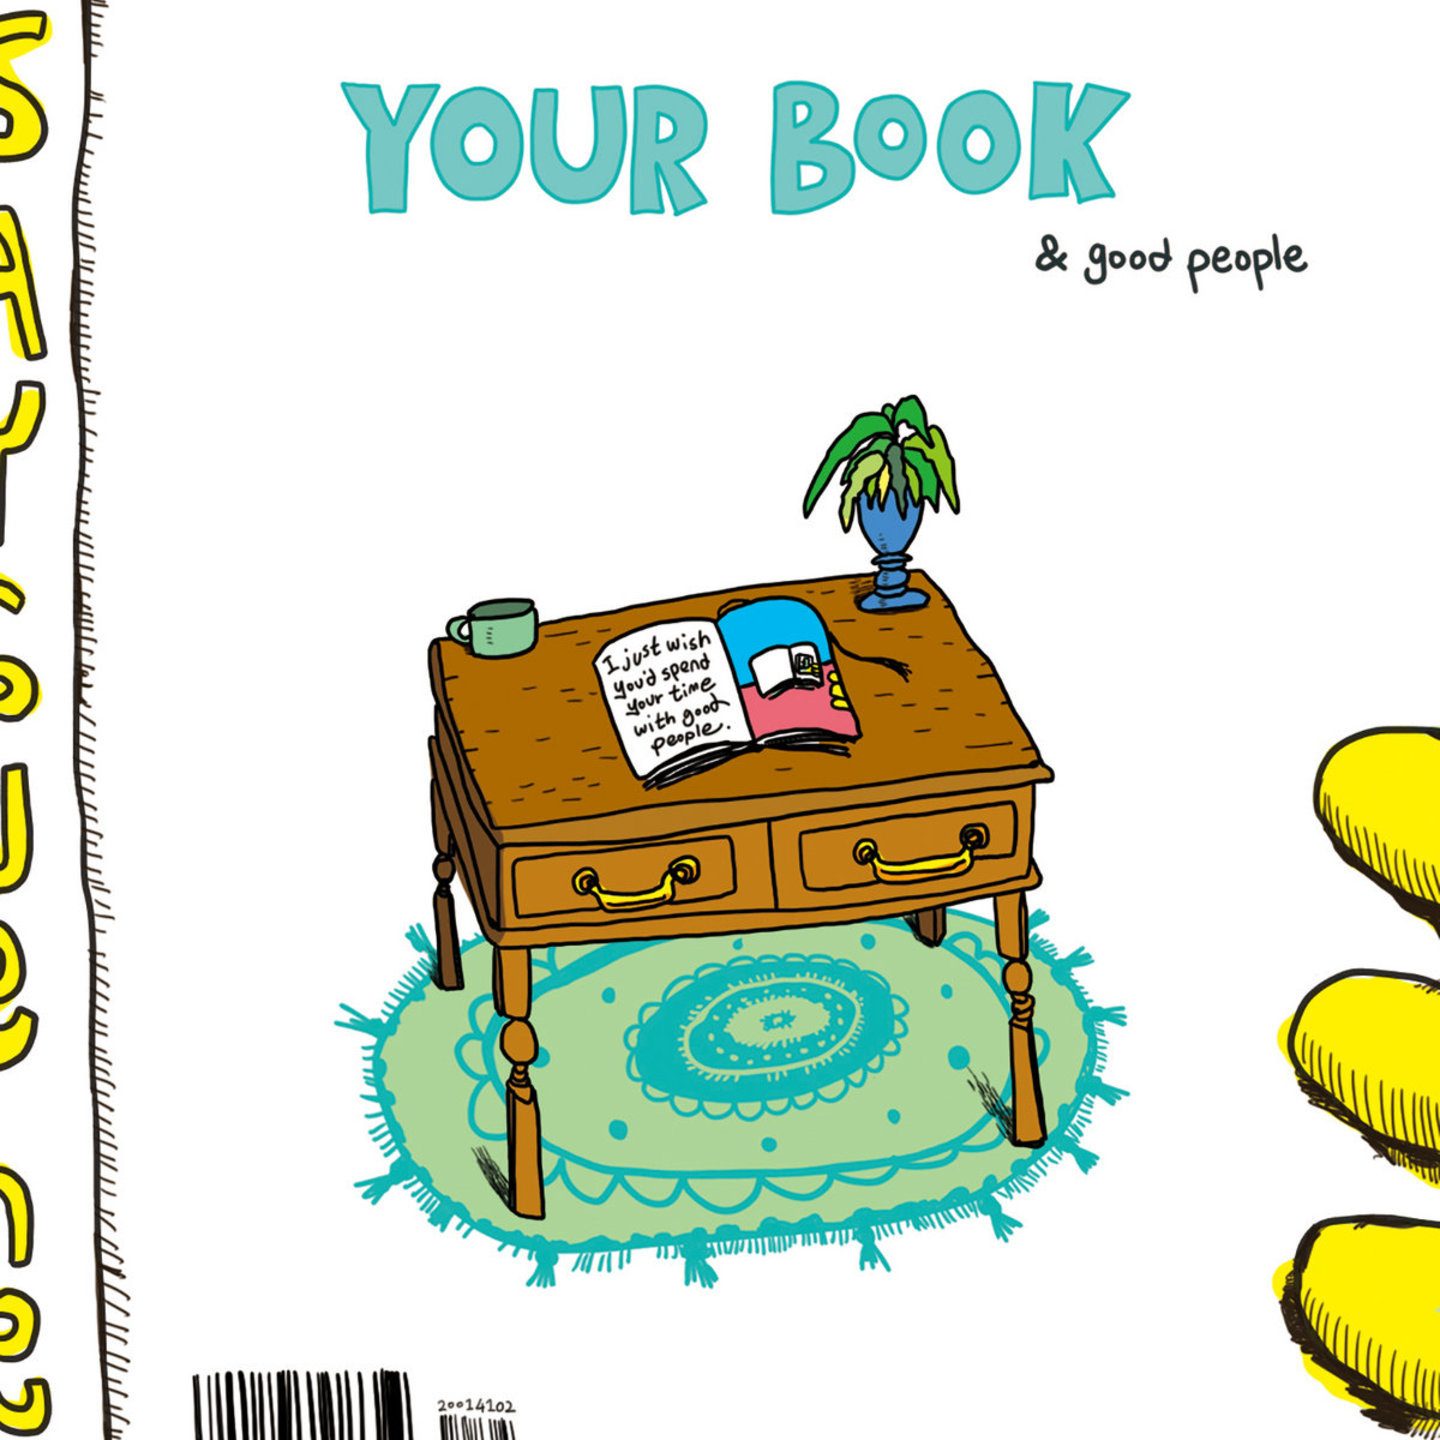 SAY SUE ME - YOUR BOOK  GOOD PEOPLE 7